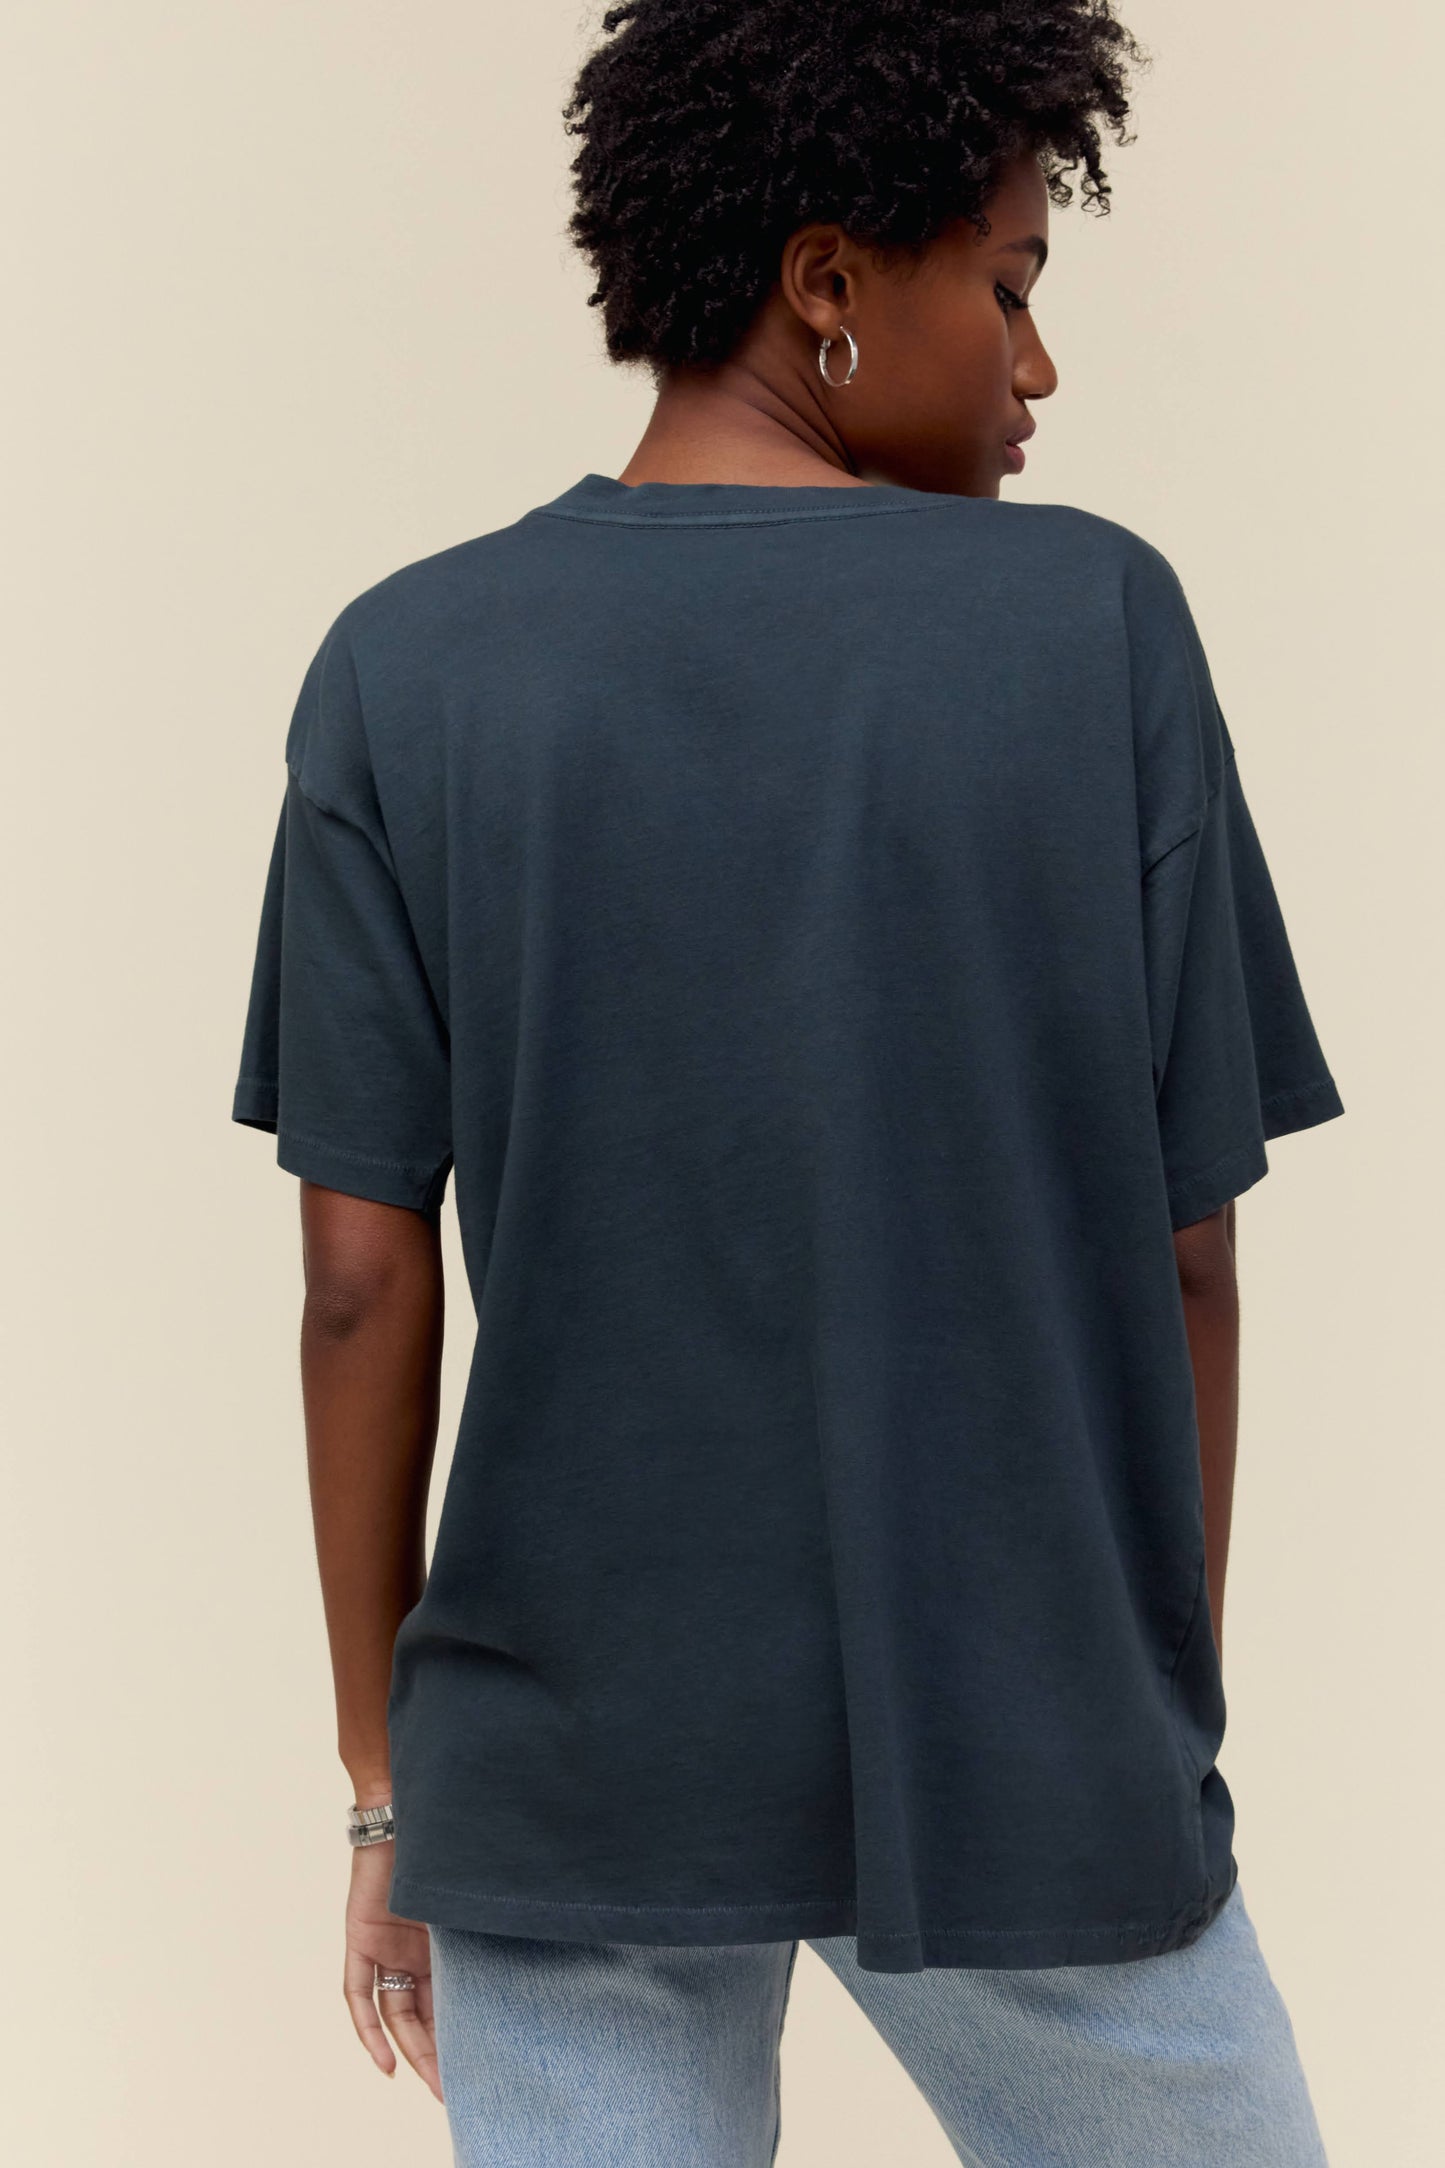 A model featuring a black tee designed with an iconic portrait of the main members and stamped with the bands name and song.